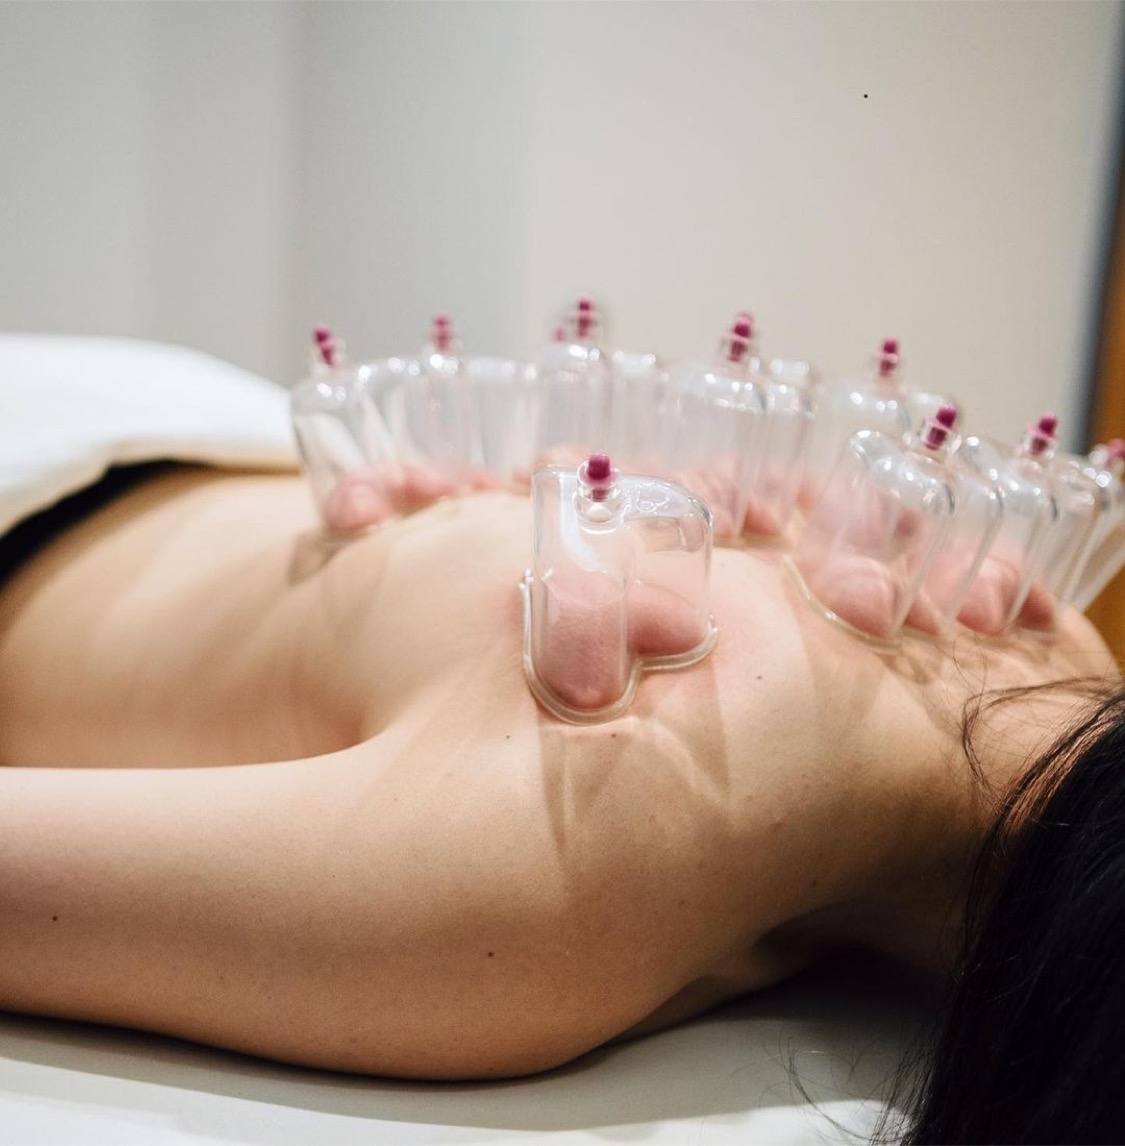 A cupping treatment from Serenity Spa & Natural Health Clinic